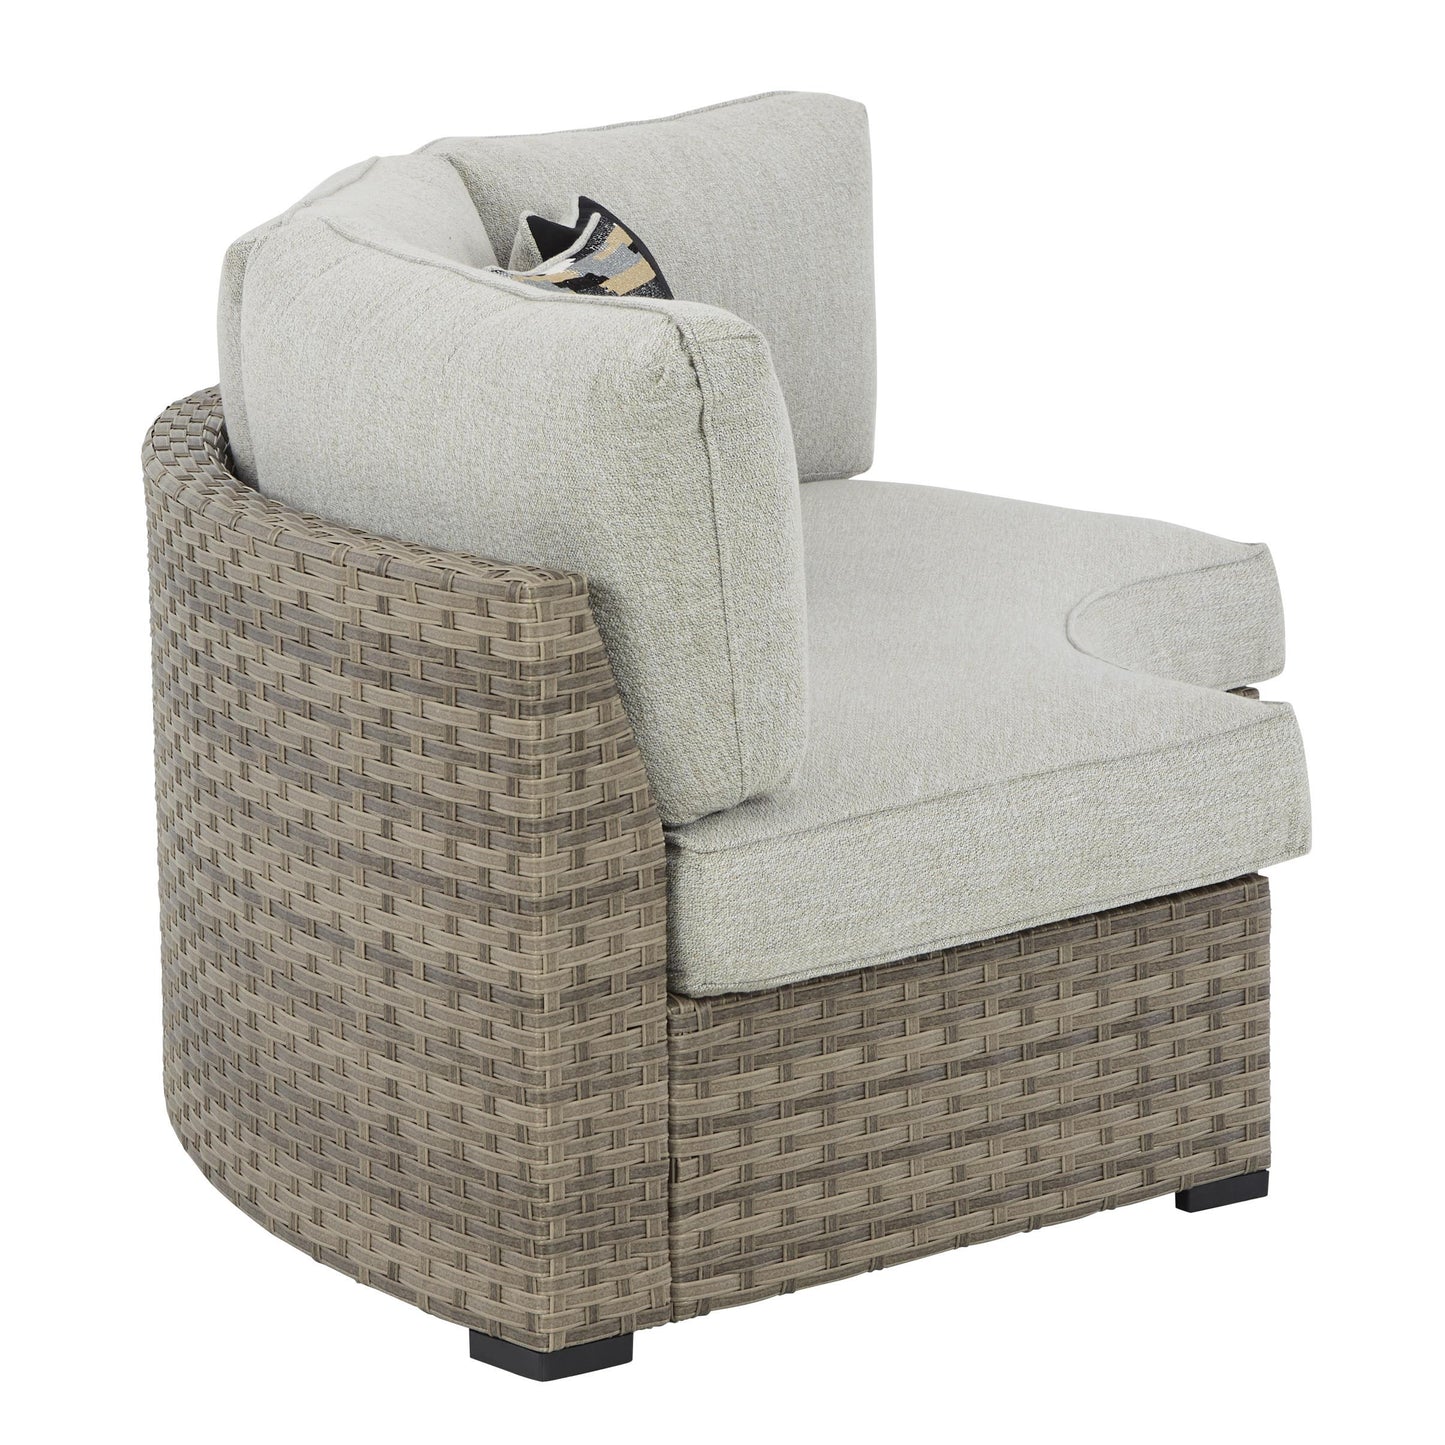 Signature Design by Ashley Outdoor Seating Loveseats P458-861 IMAGE 2